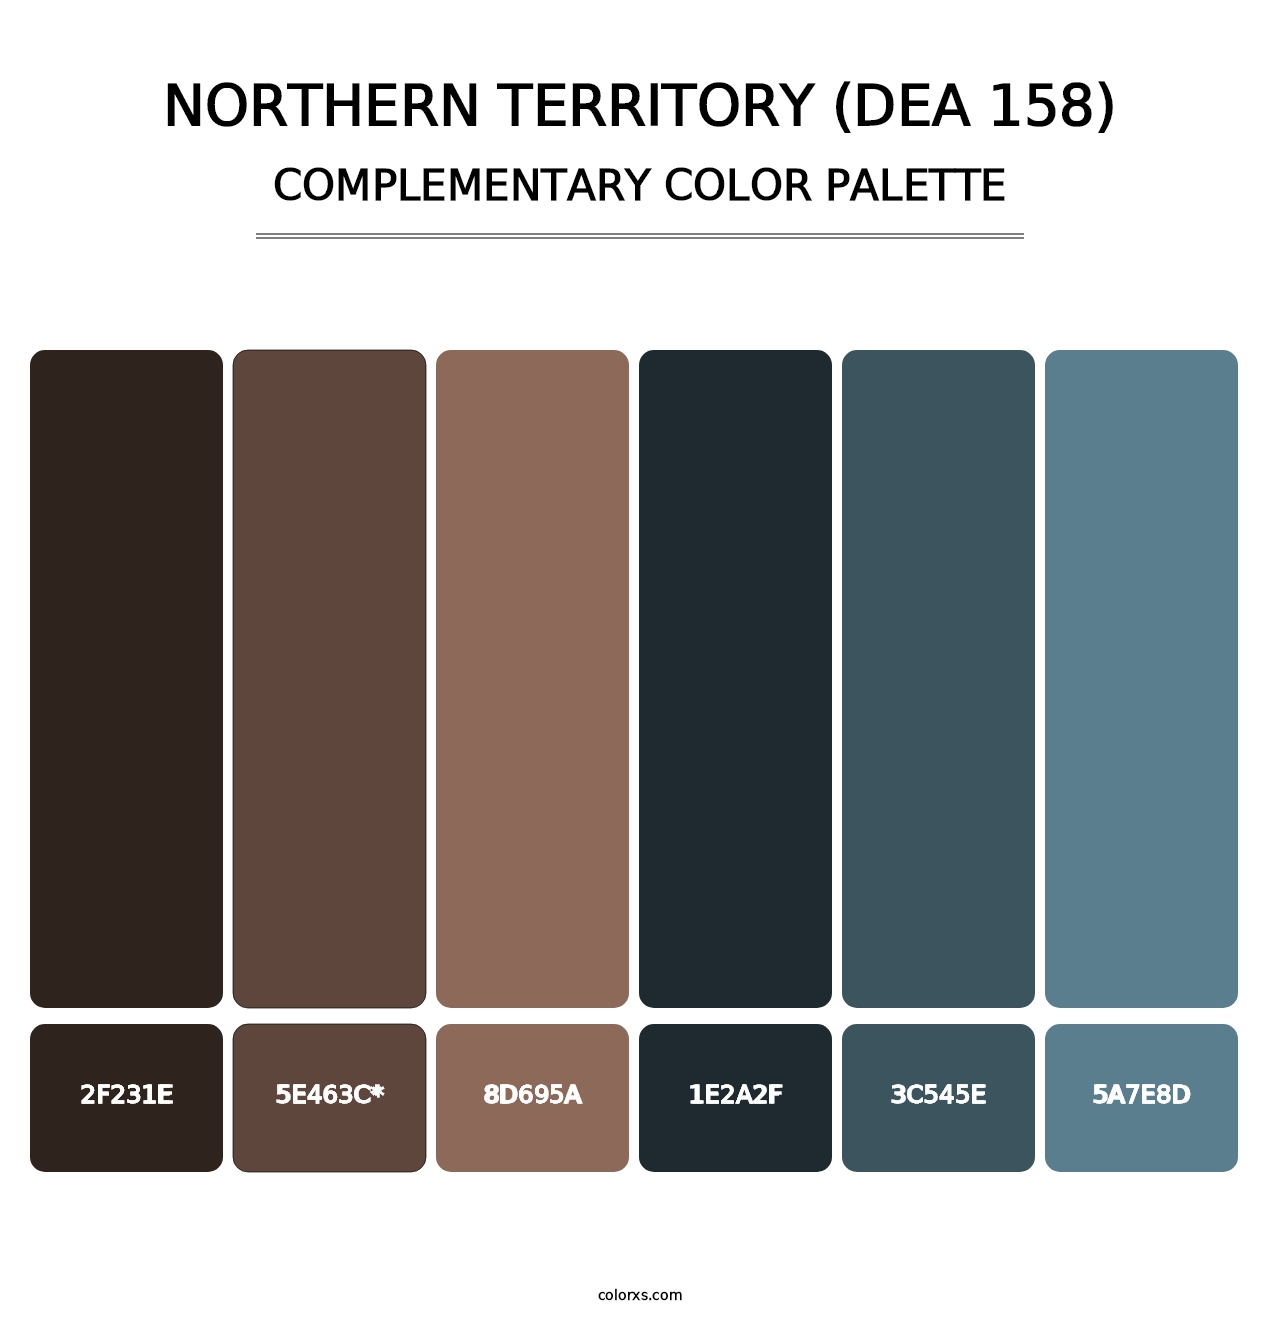 Northern Territory (DEA 158) - Complementary Color Palette